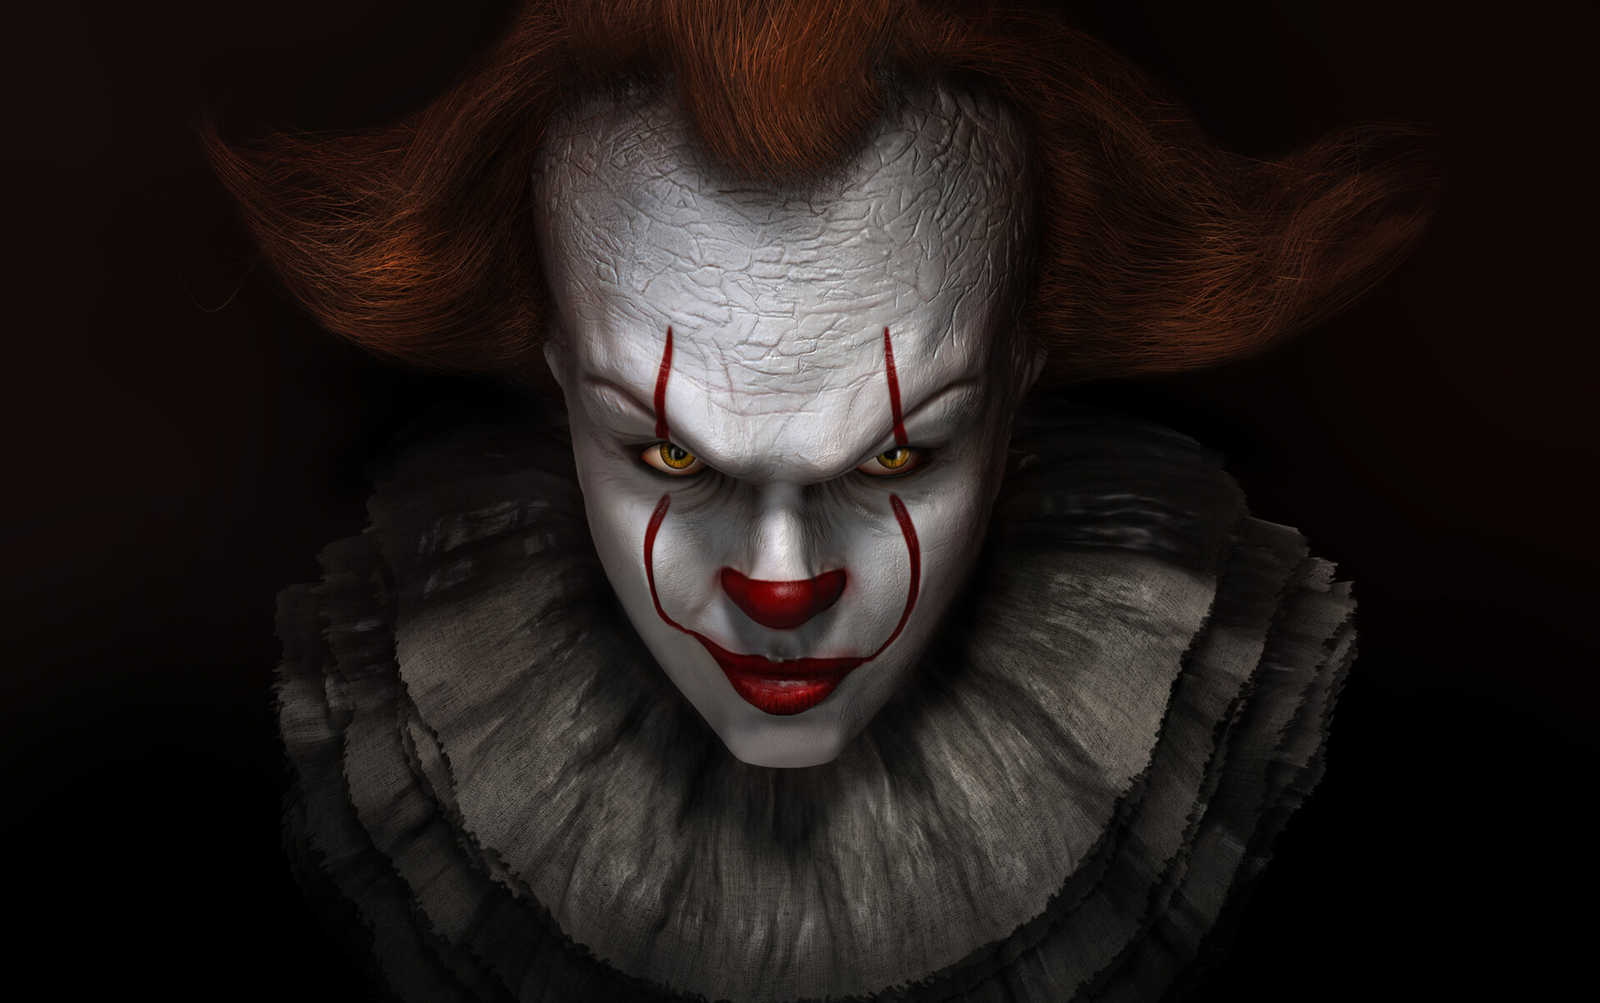 Pennywisethe Dancing Clown